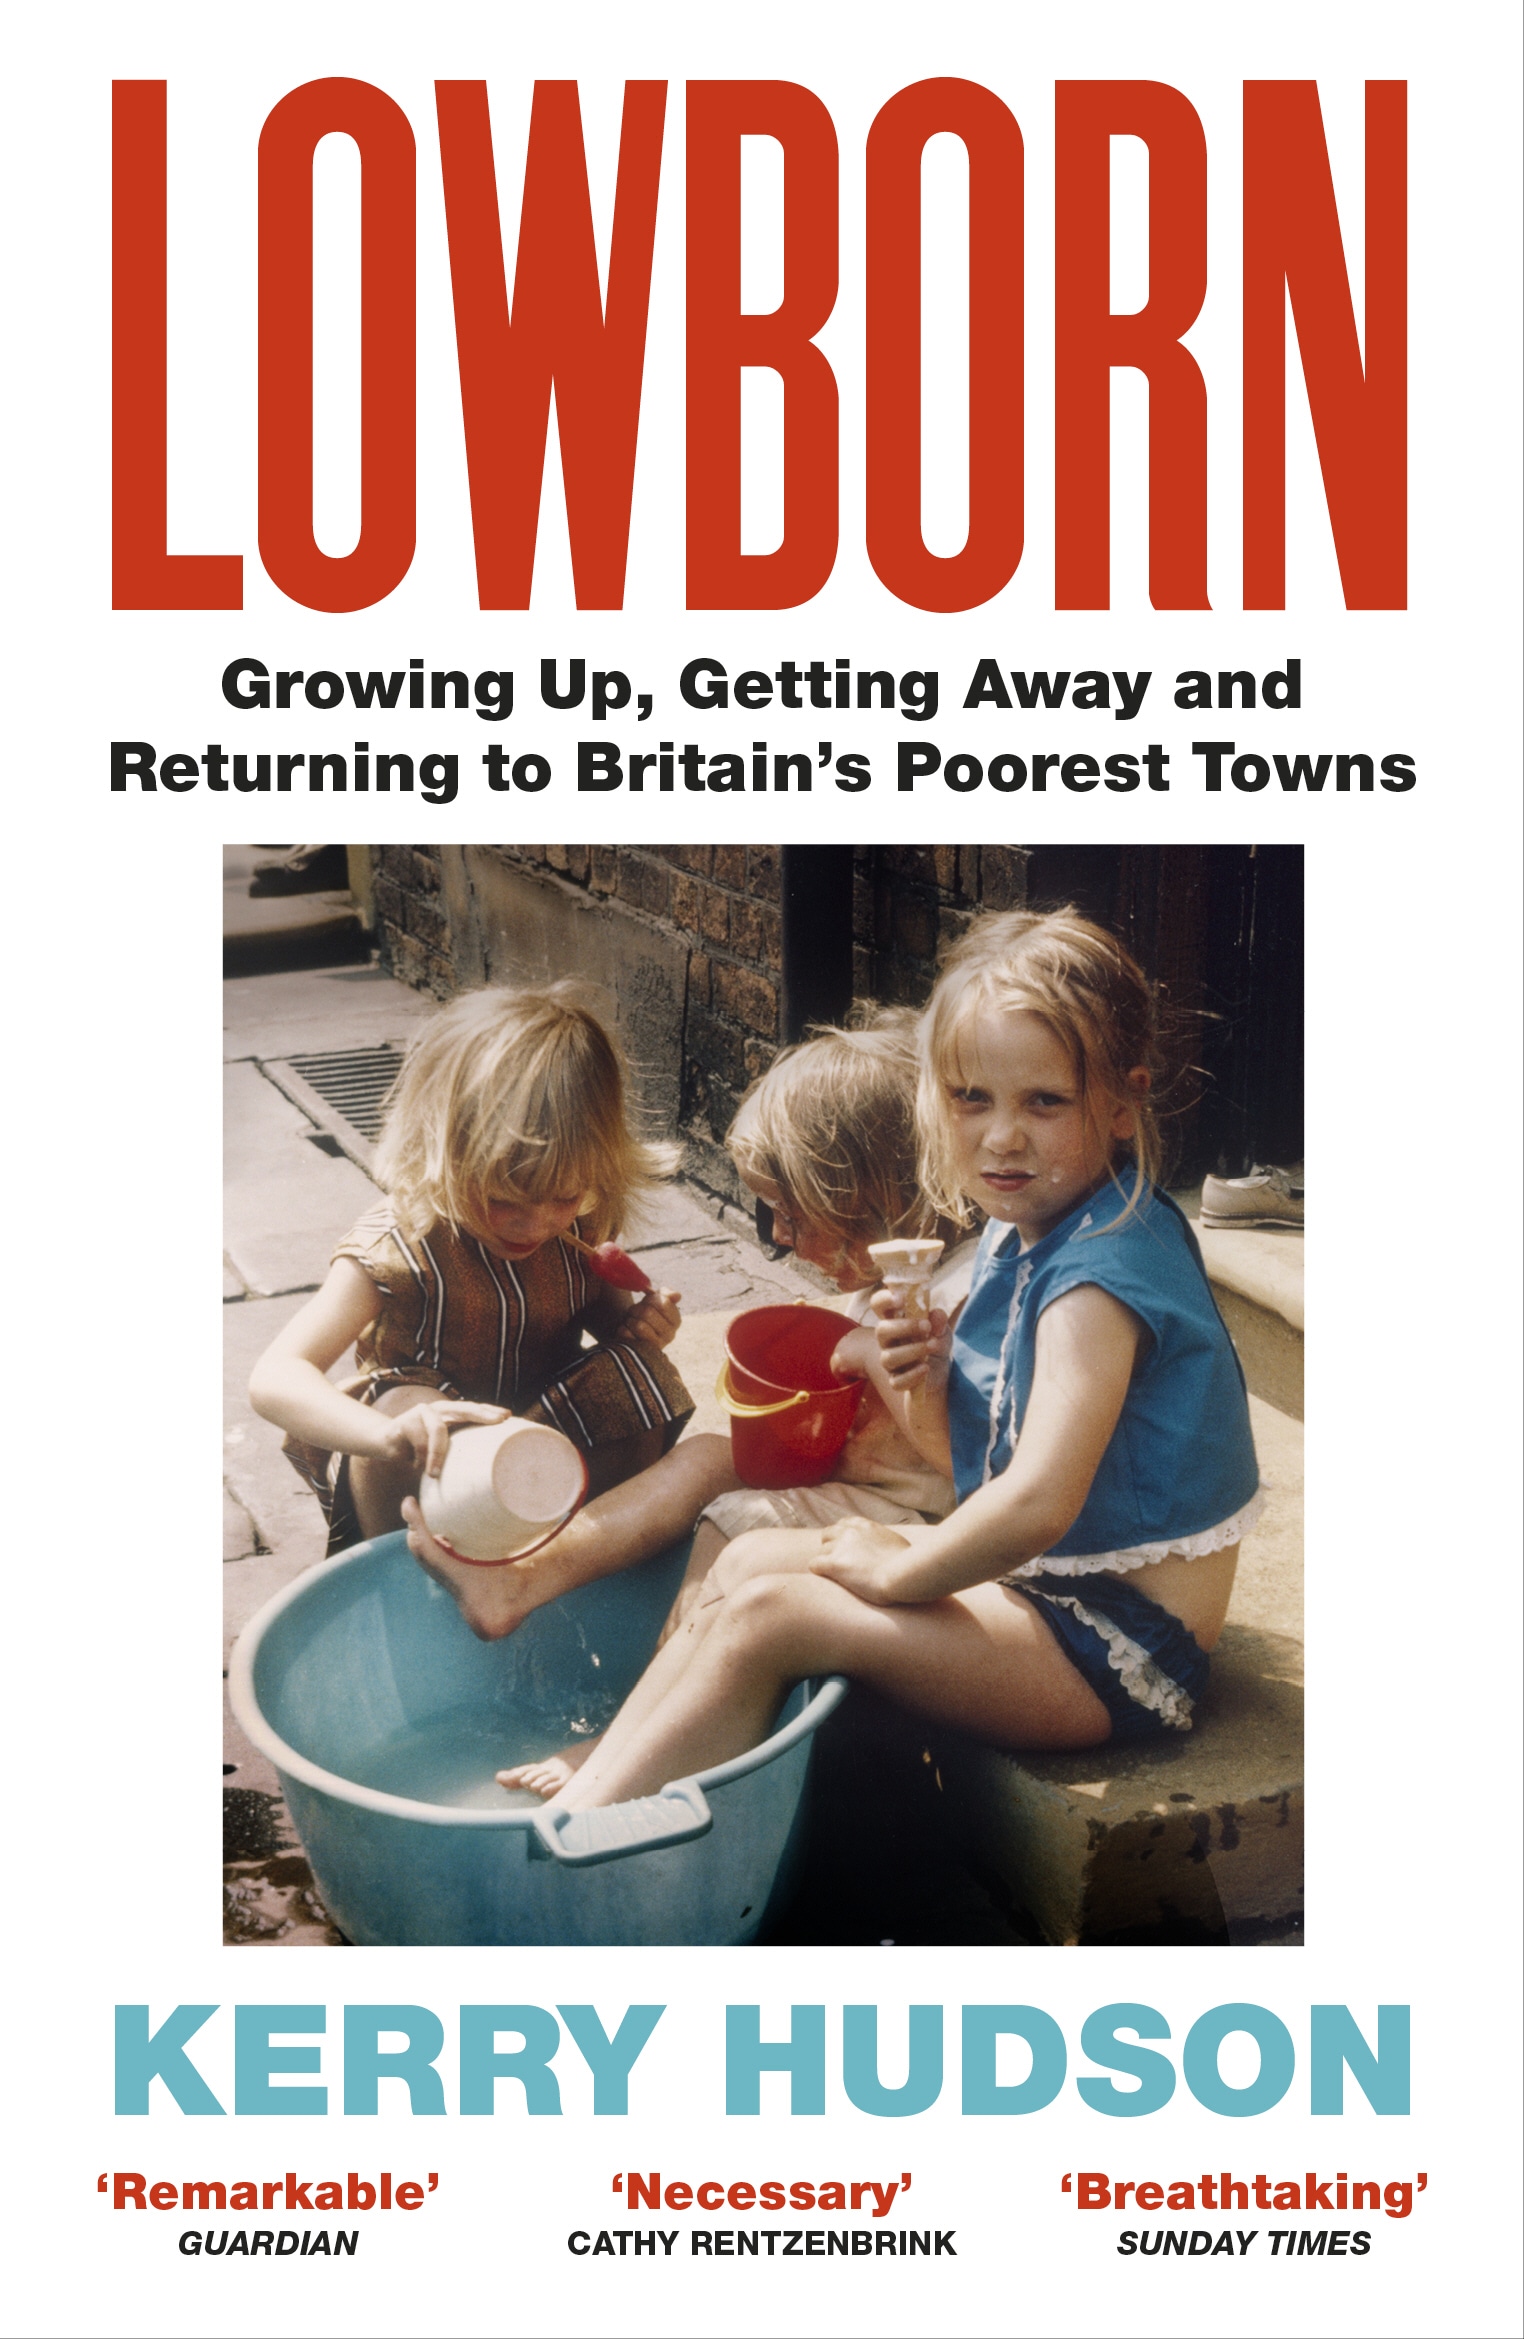 Book “Lowborn” by Kerry Hudson — August 6, 2020